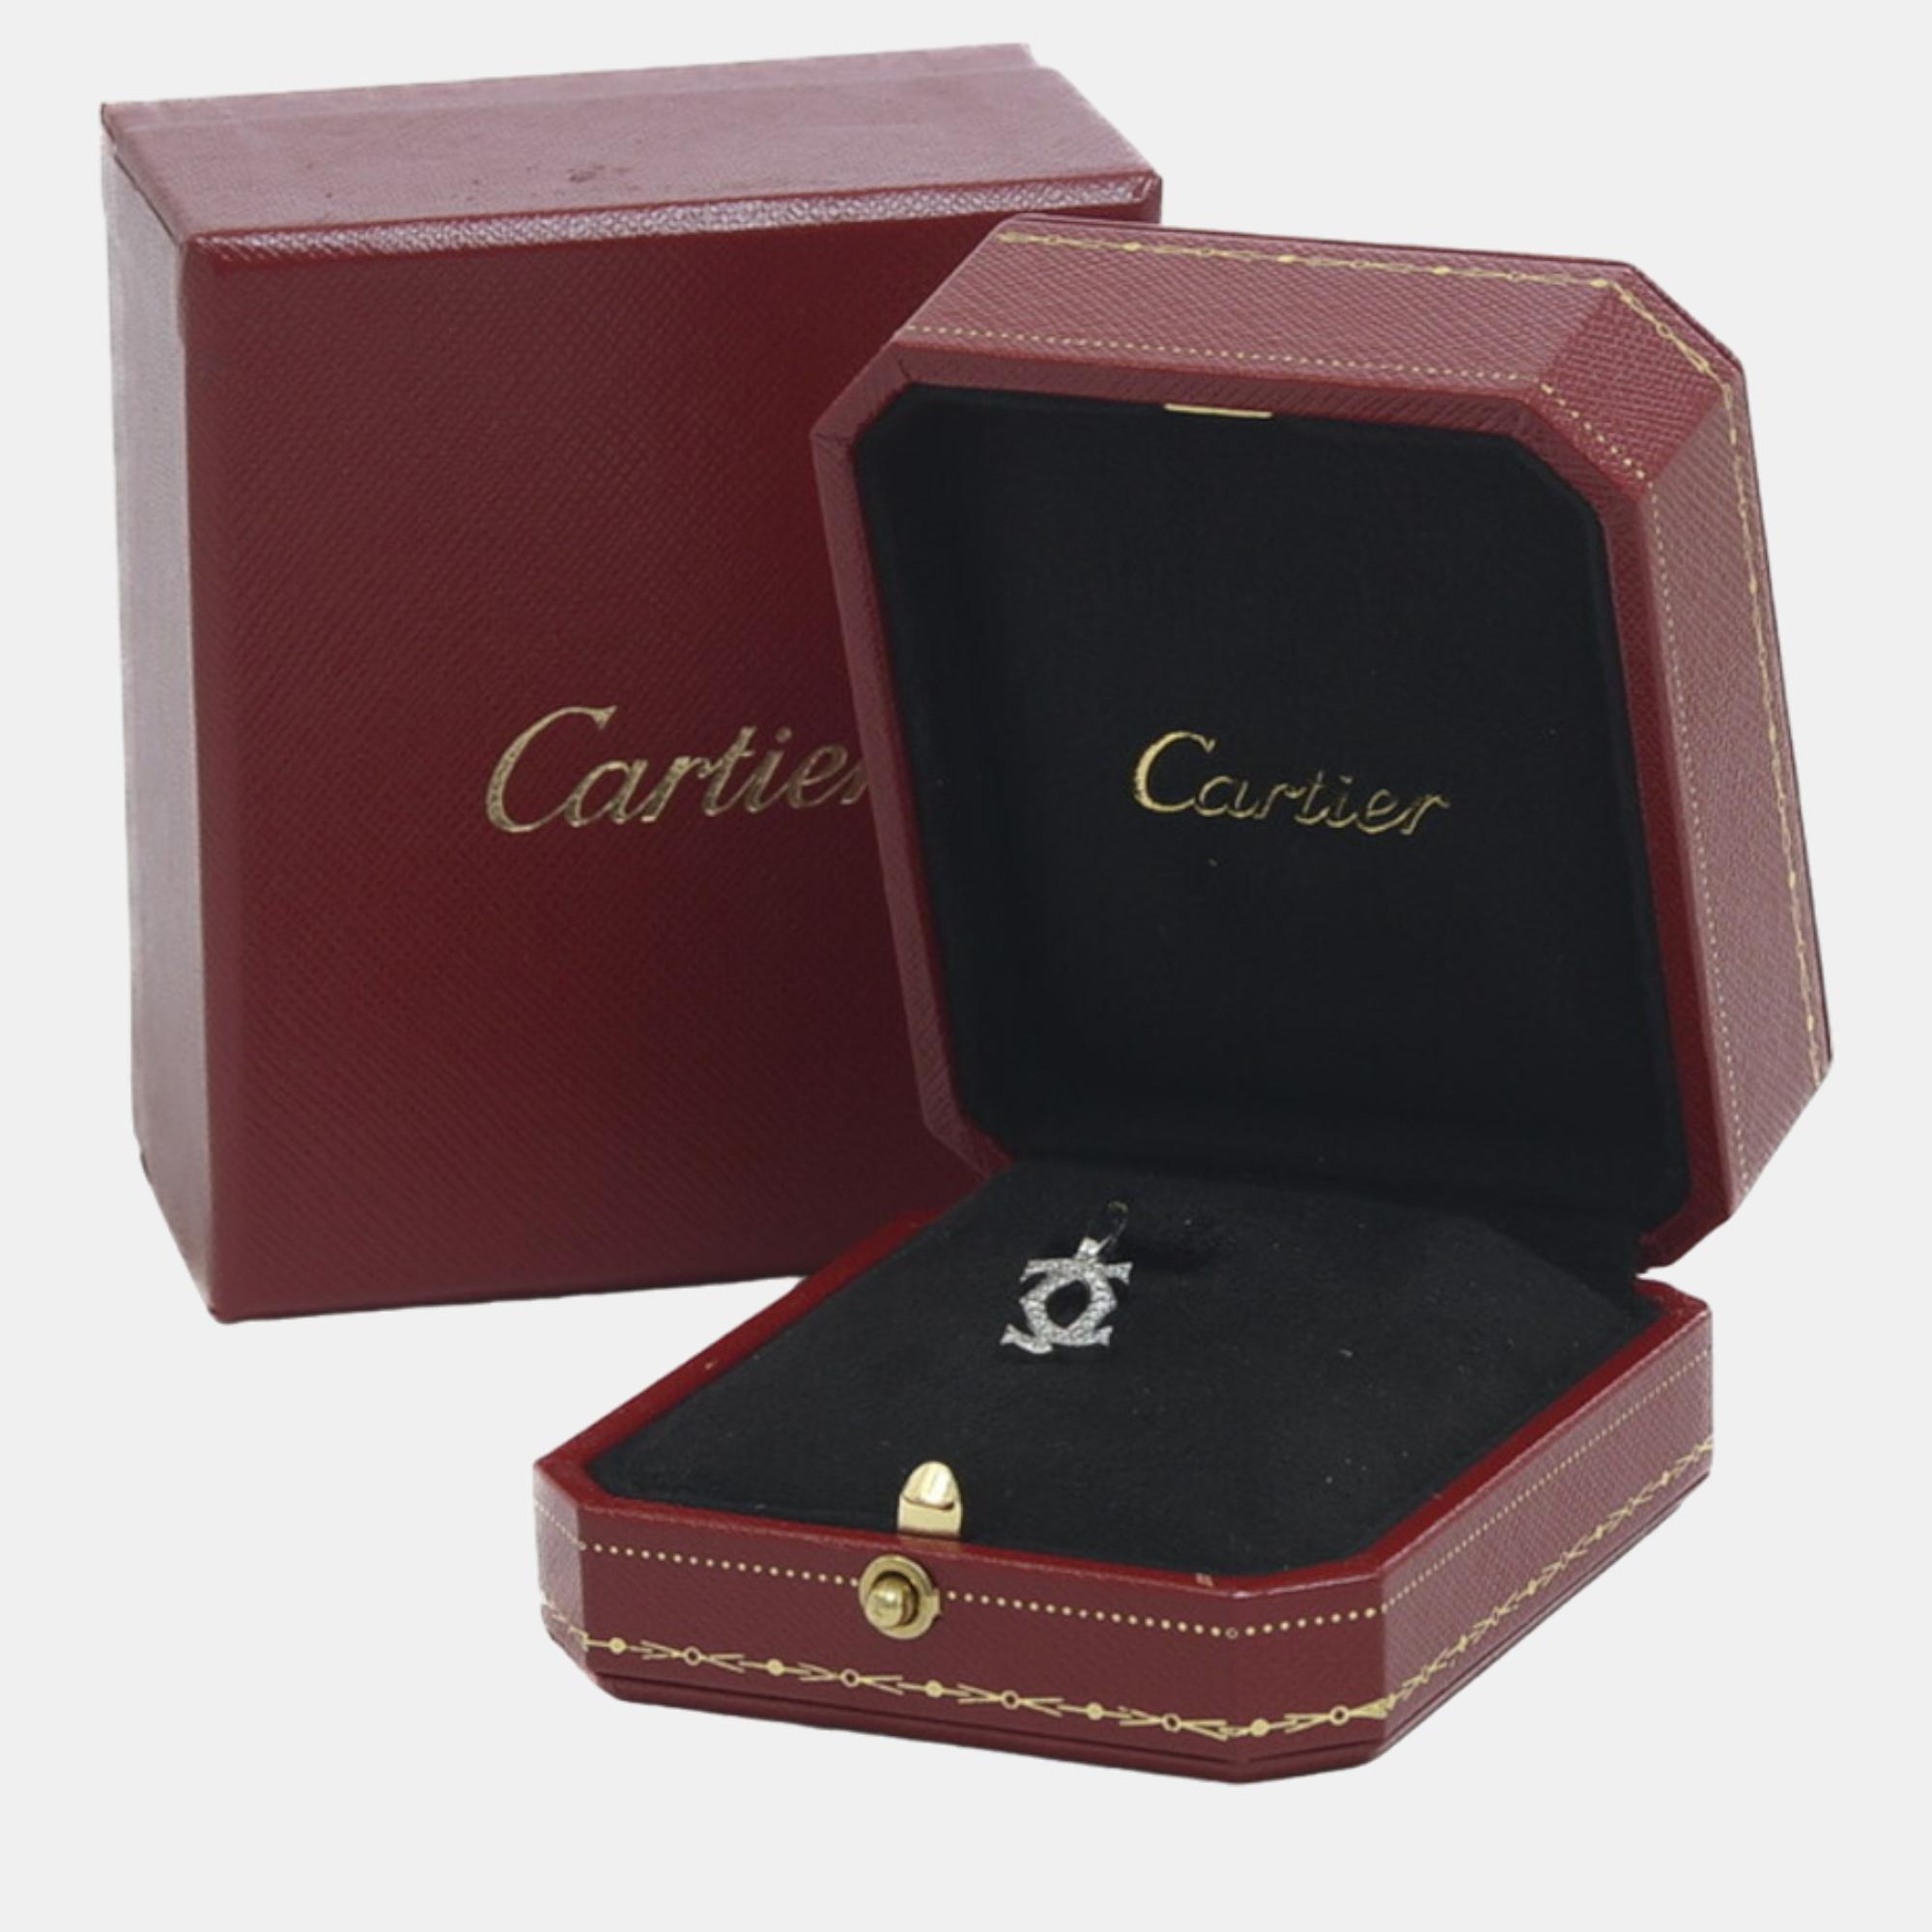 Cartier Double C 18K White Gold Diamond Charms And Pendants